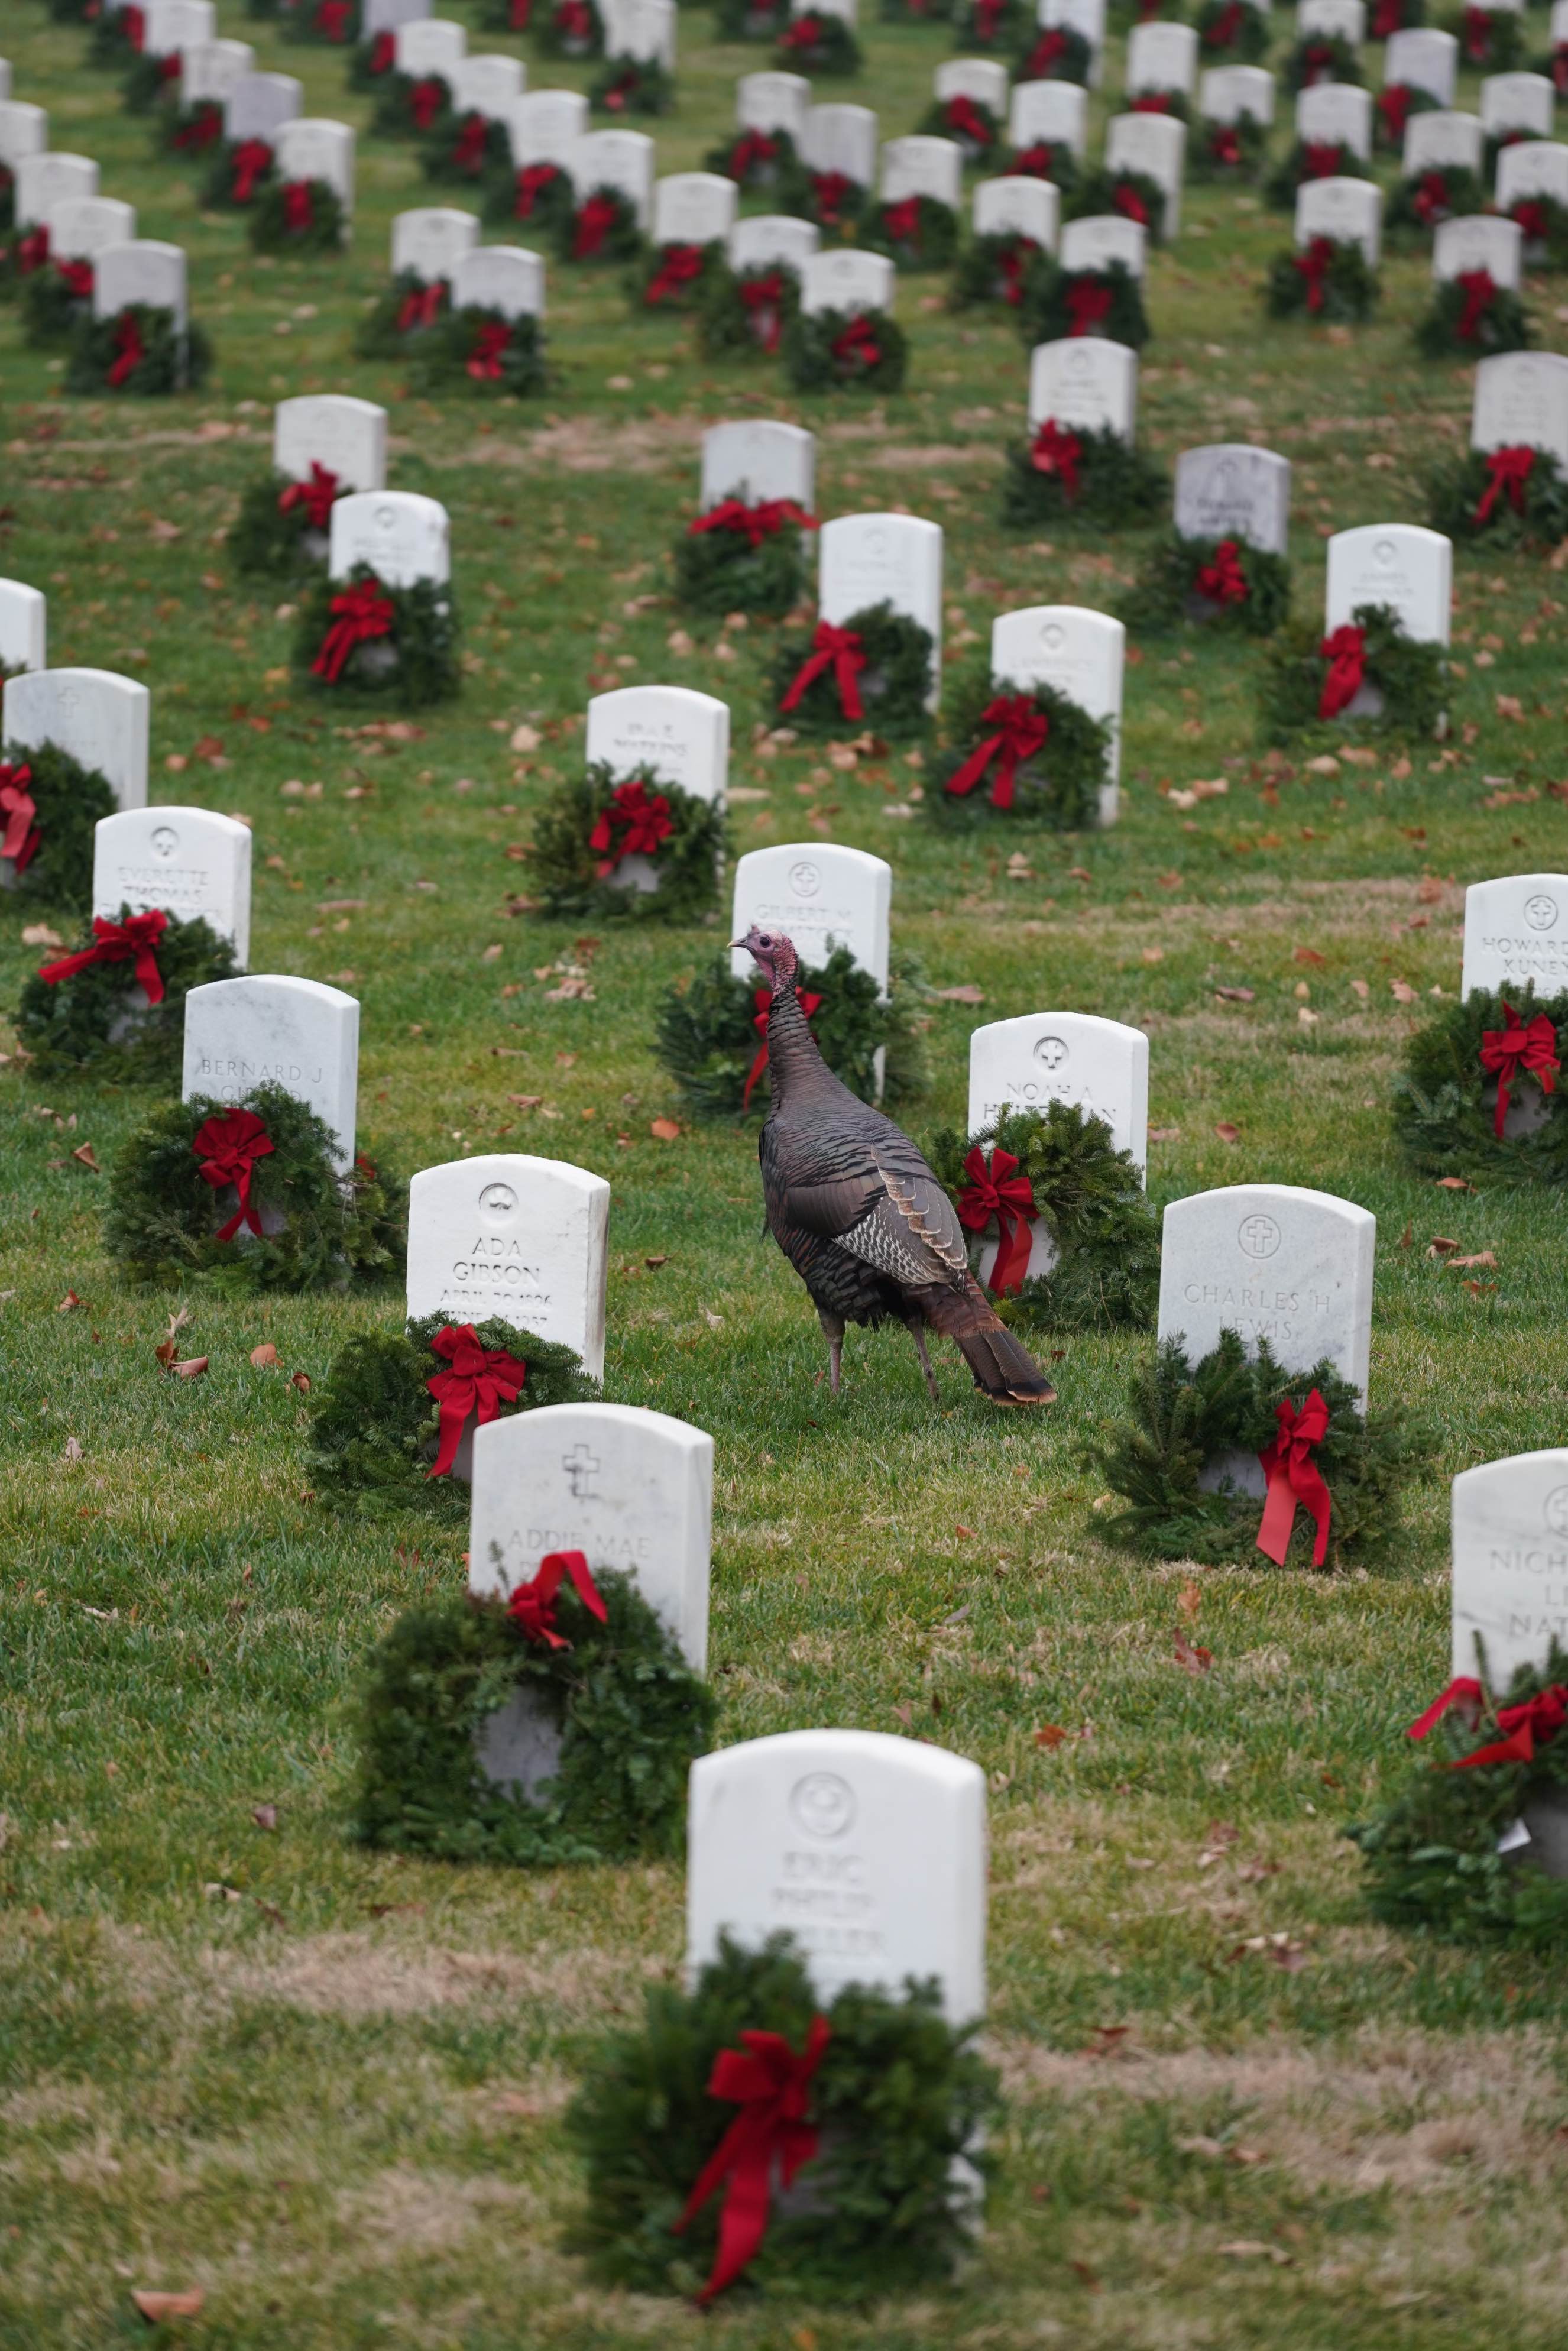 Grave headstones at Arlington National Cemetery with wreaths